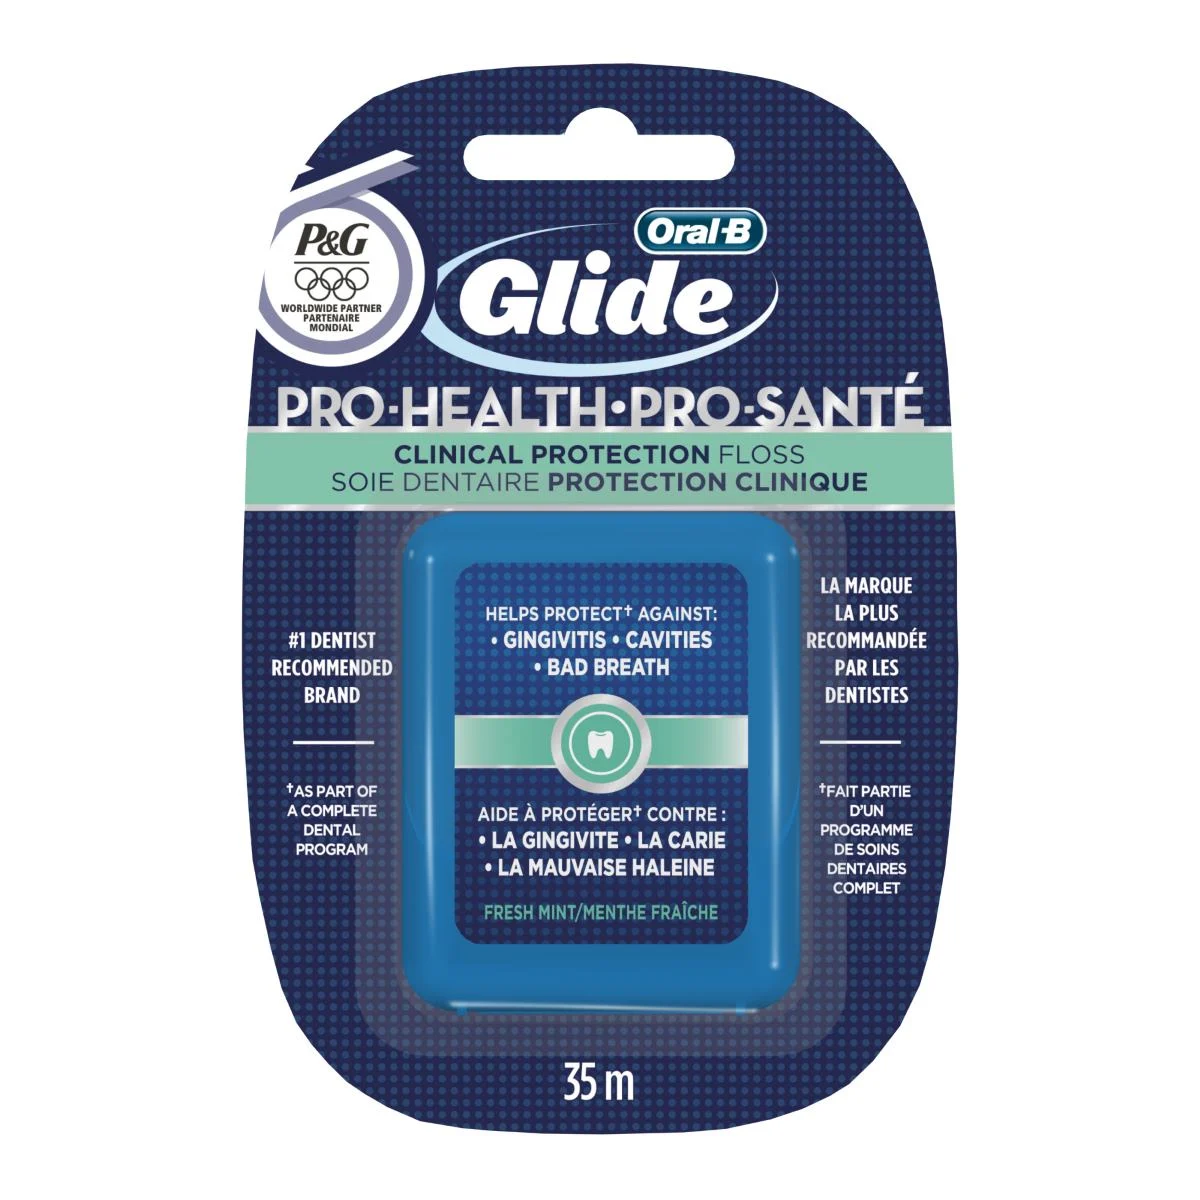 Oral-B Glide Pro-Health Clinical Protection Mint Floss 